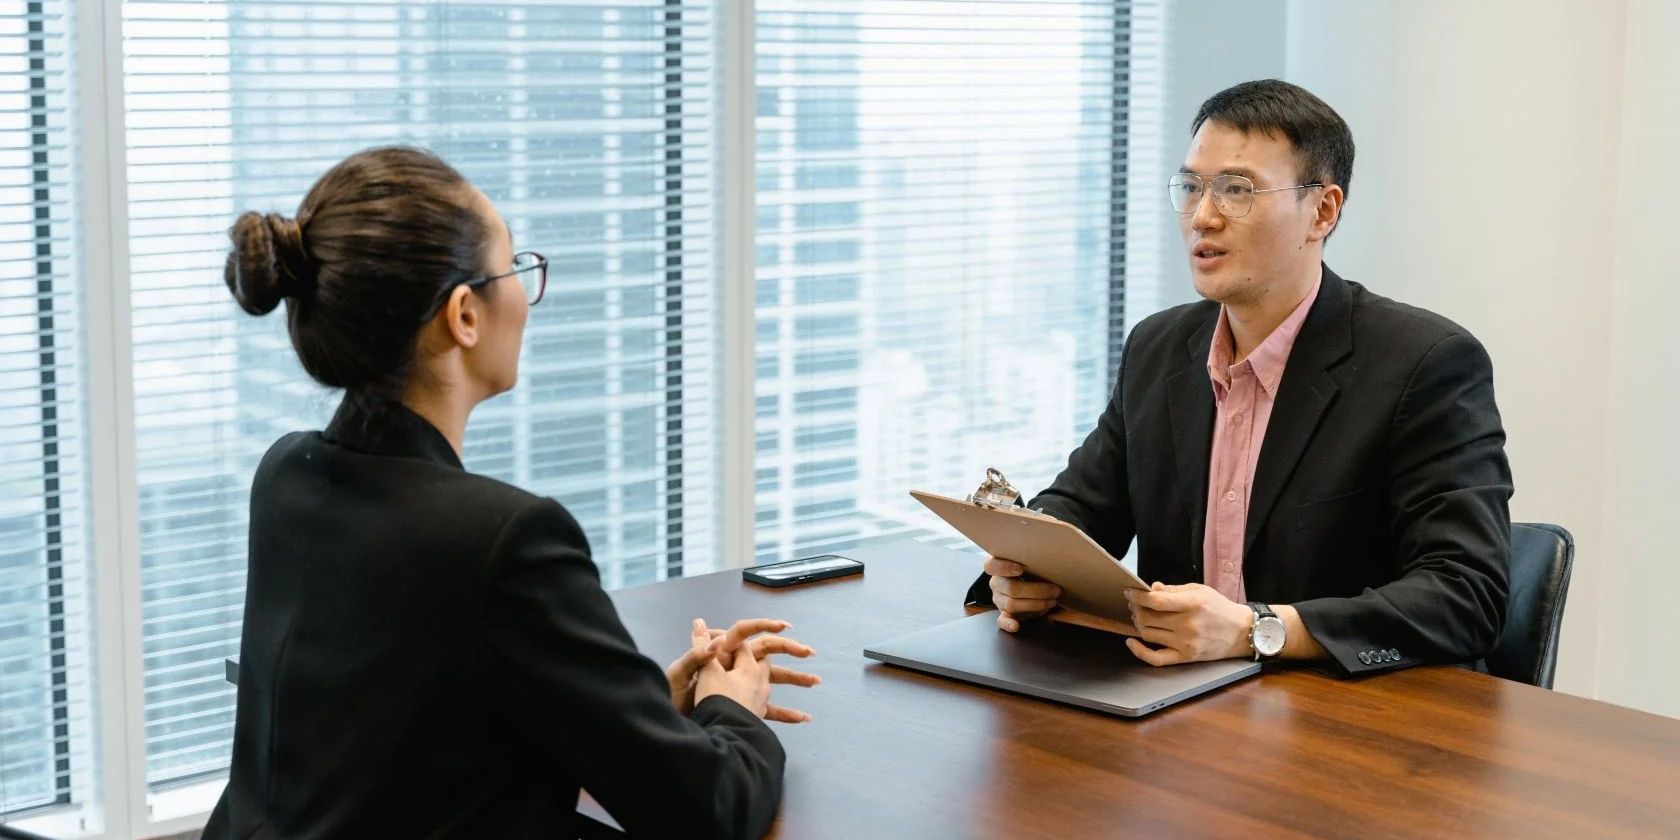 8 Job Interview Tips for Introverts